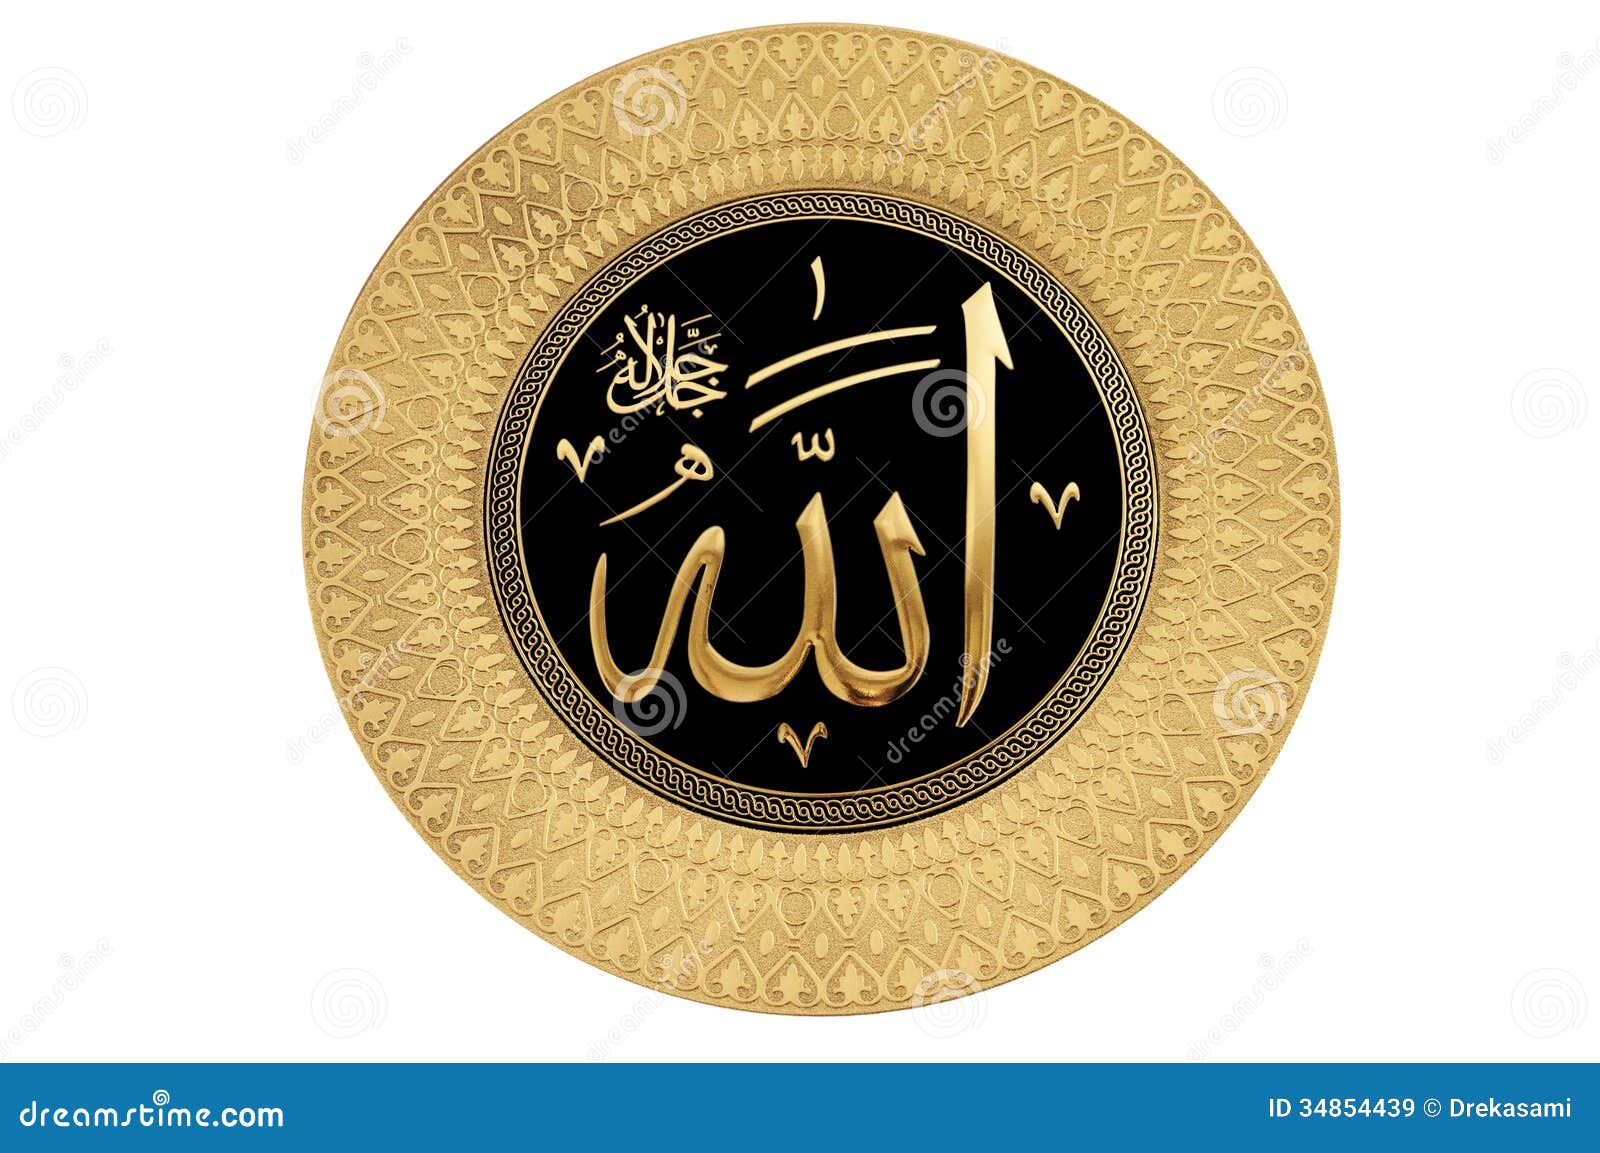 Name of Allah ( God) stock image. Image of bench, style - 34854439